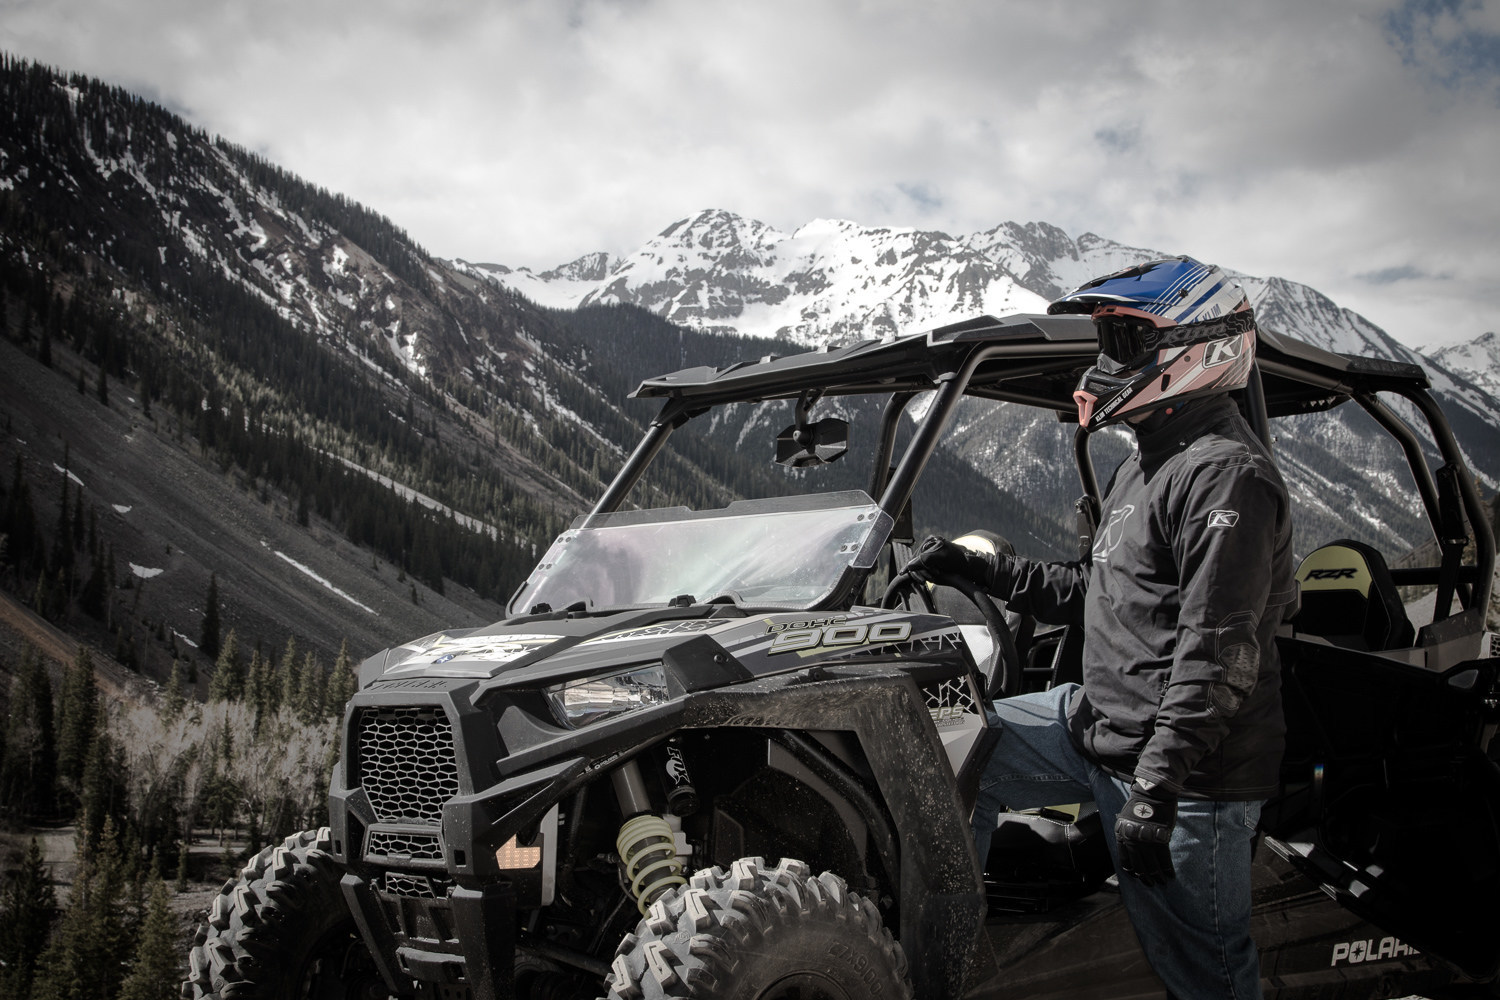 Polaris Adventures consists of area experts providing ride and drive options in Polaris vehicles for adventurers of all skill le